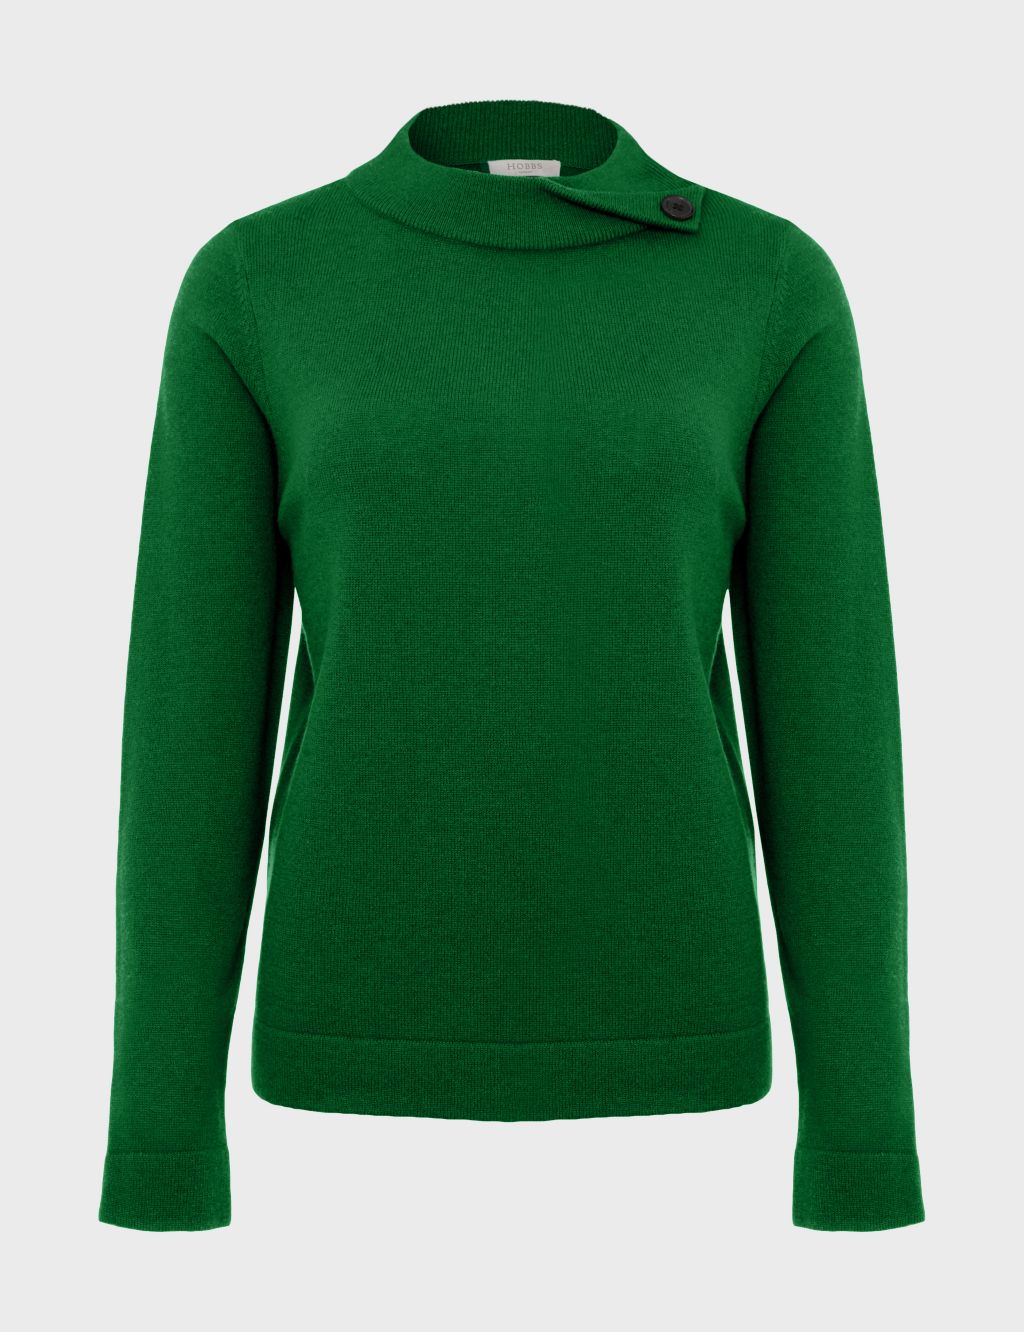 Wool Rich Crew Neck Jumper with Cashmere image 2